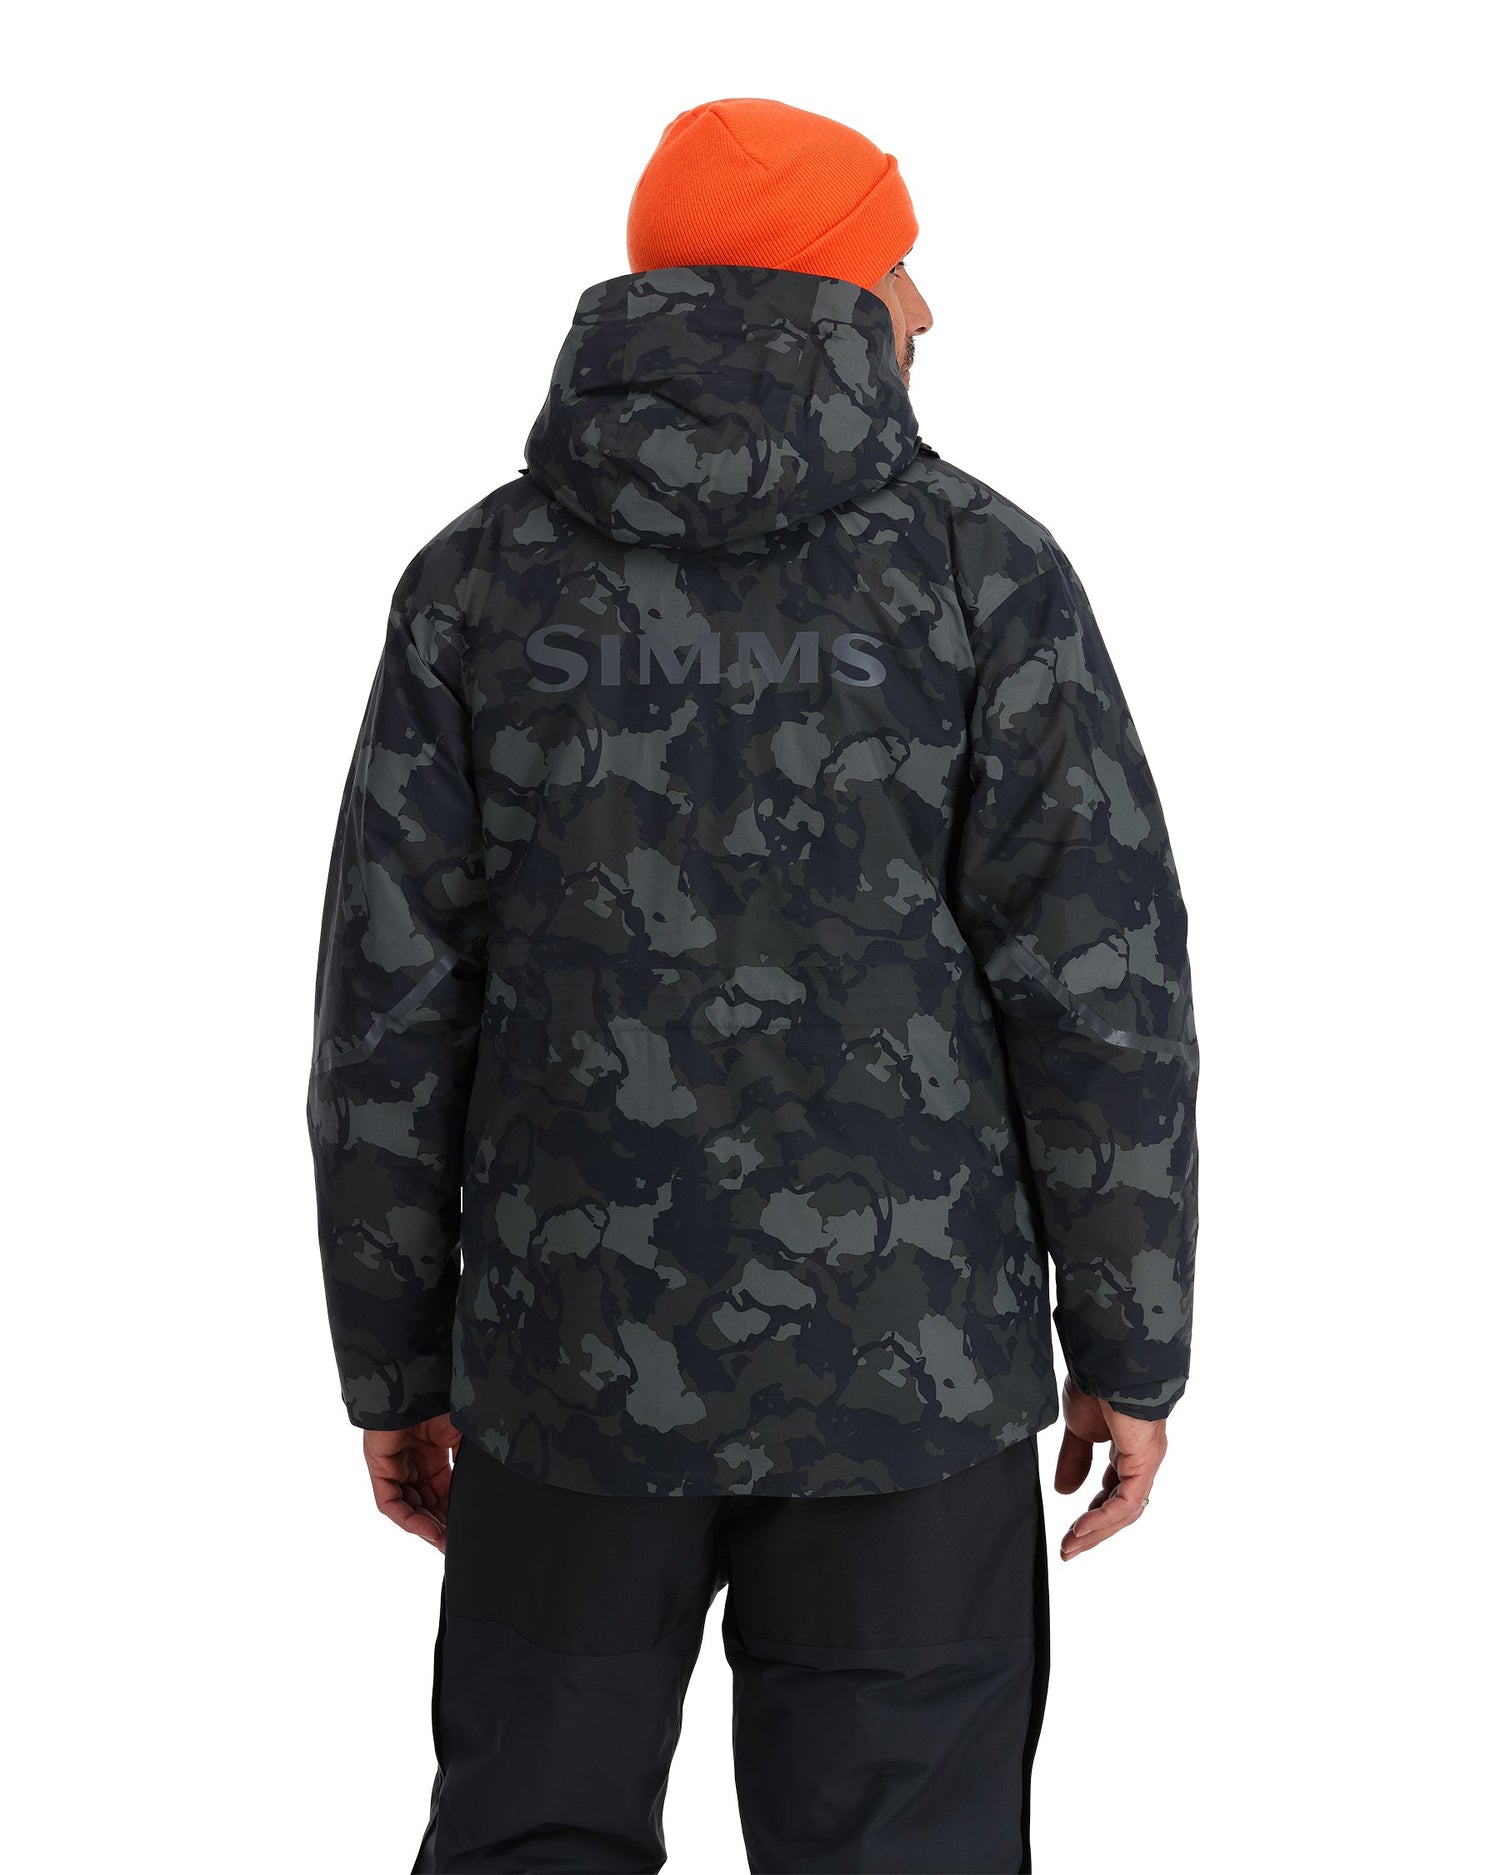 13865-1033-simms-challenger-insulated-jacket-model